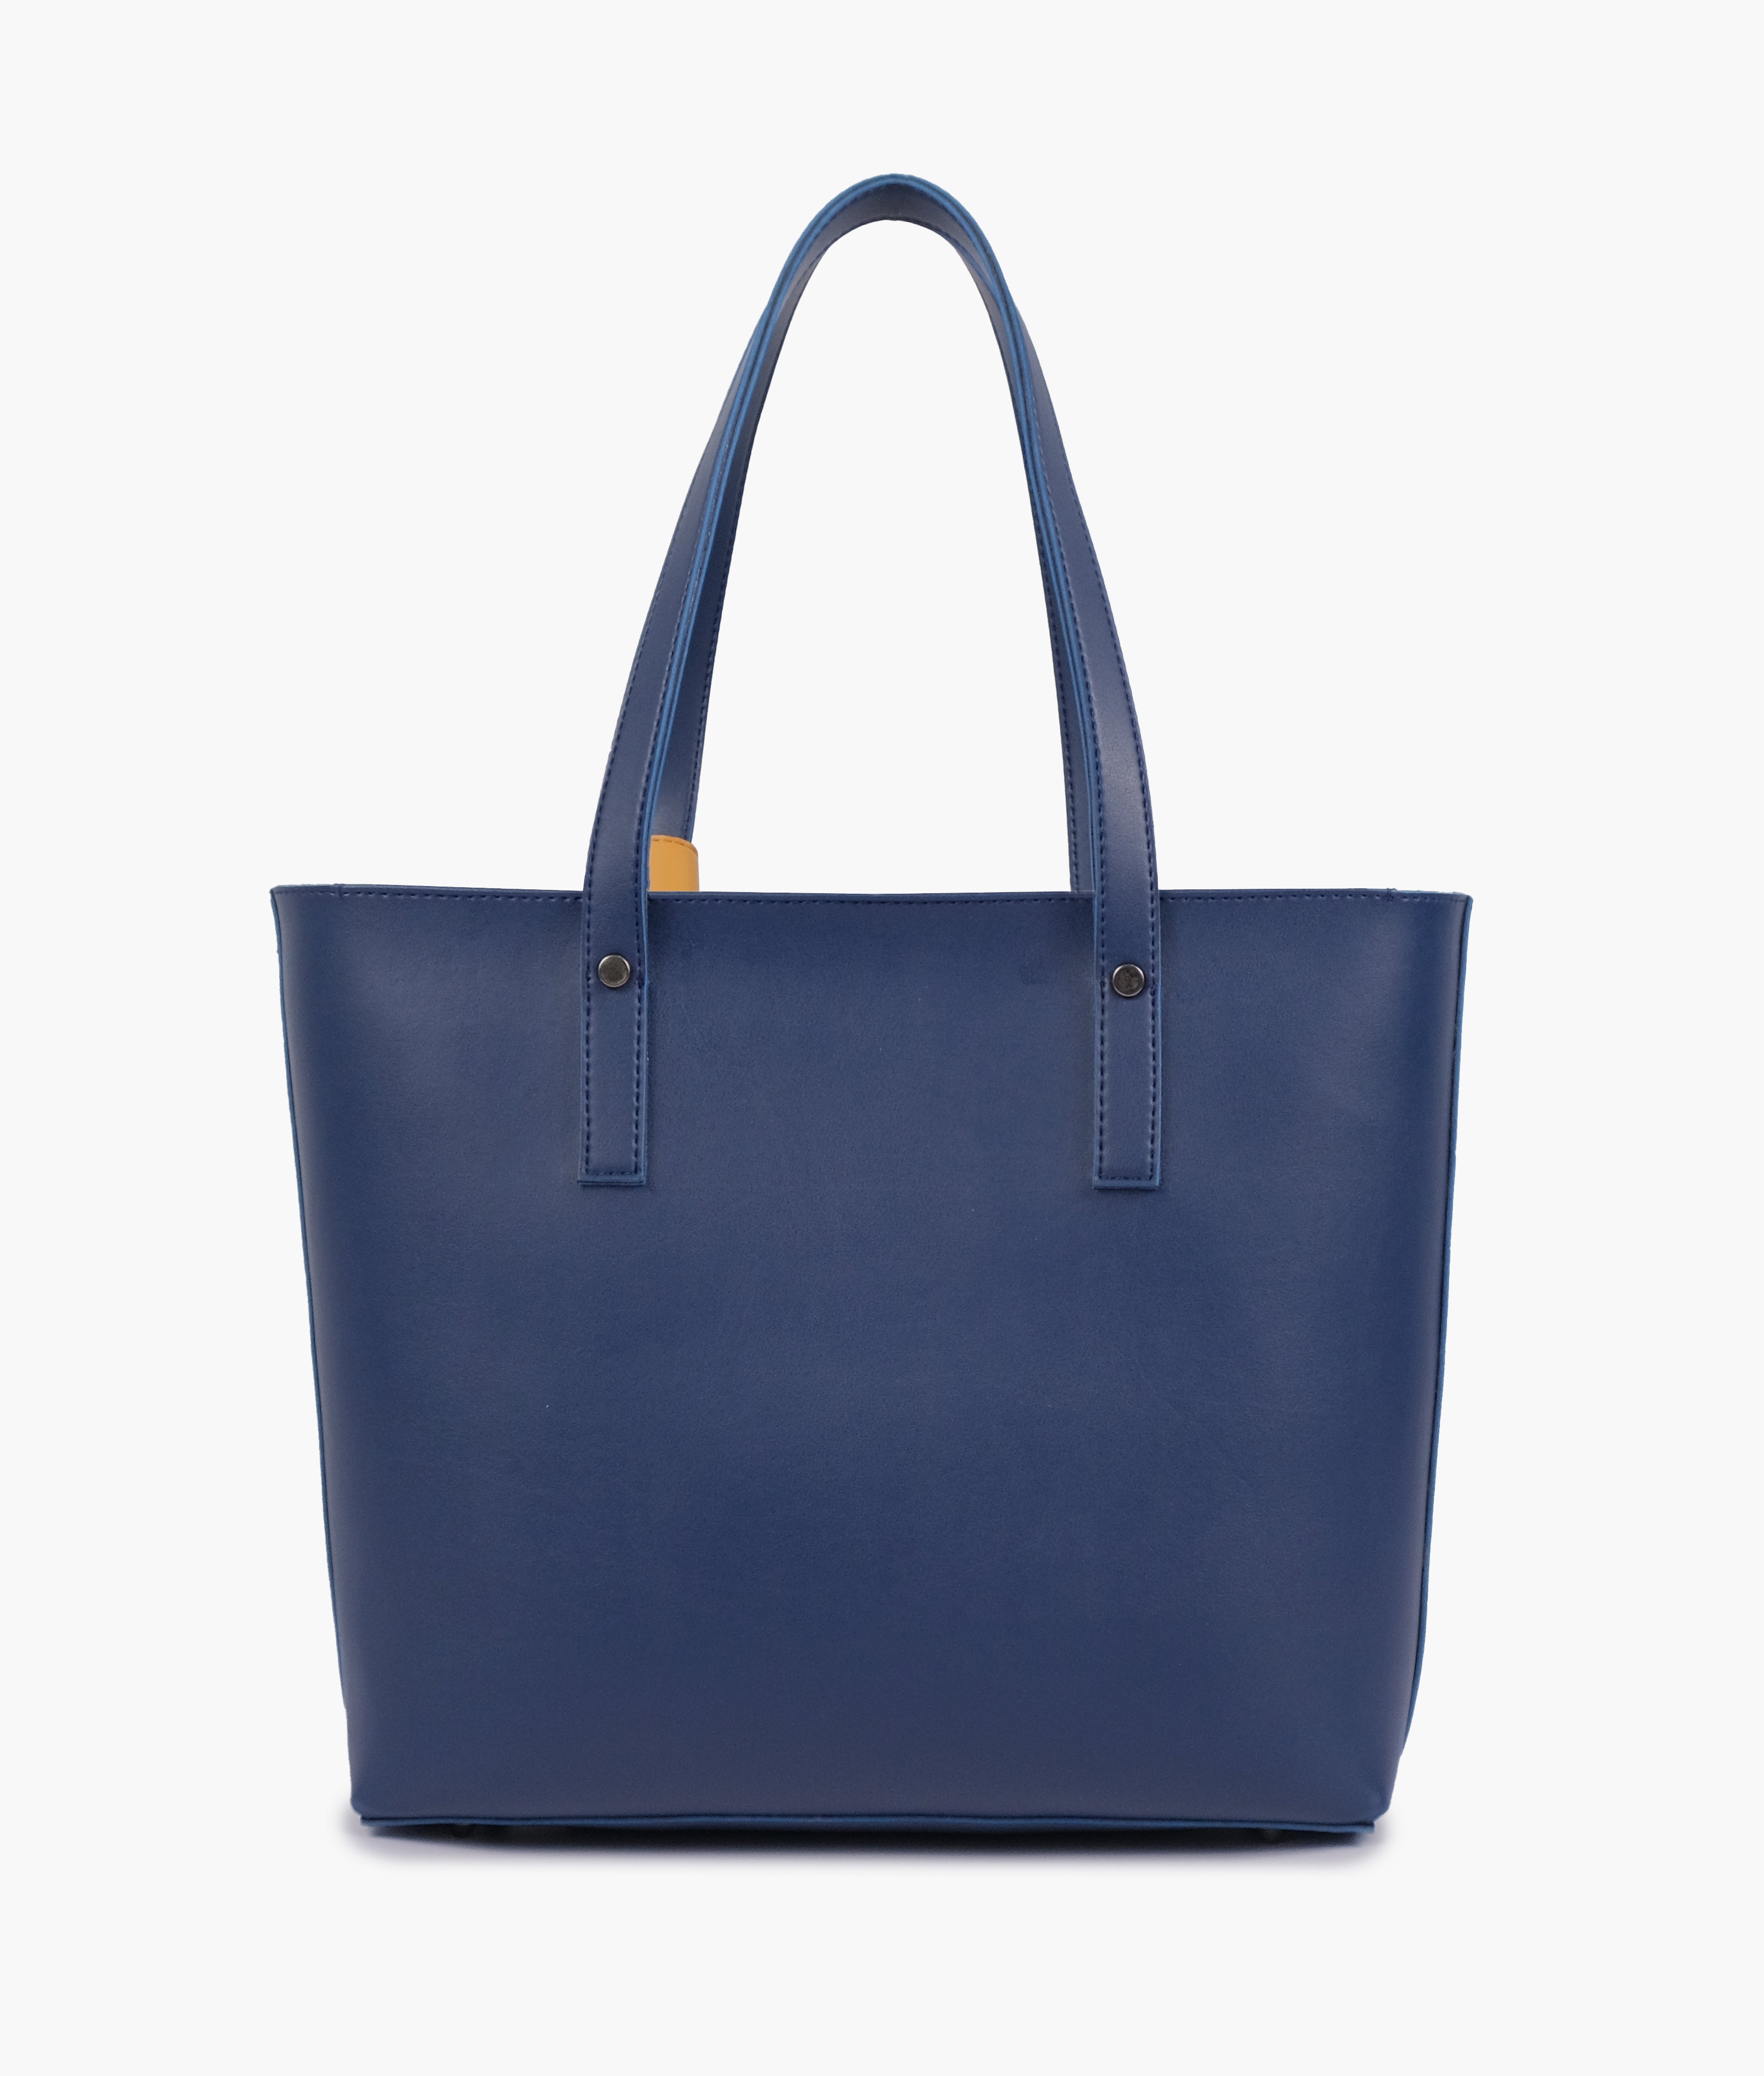 Blue tote bag with detachable pouch